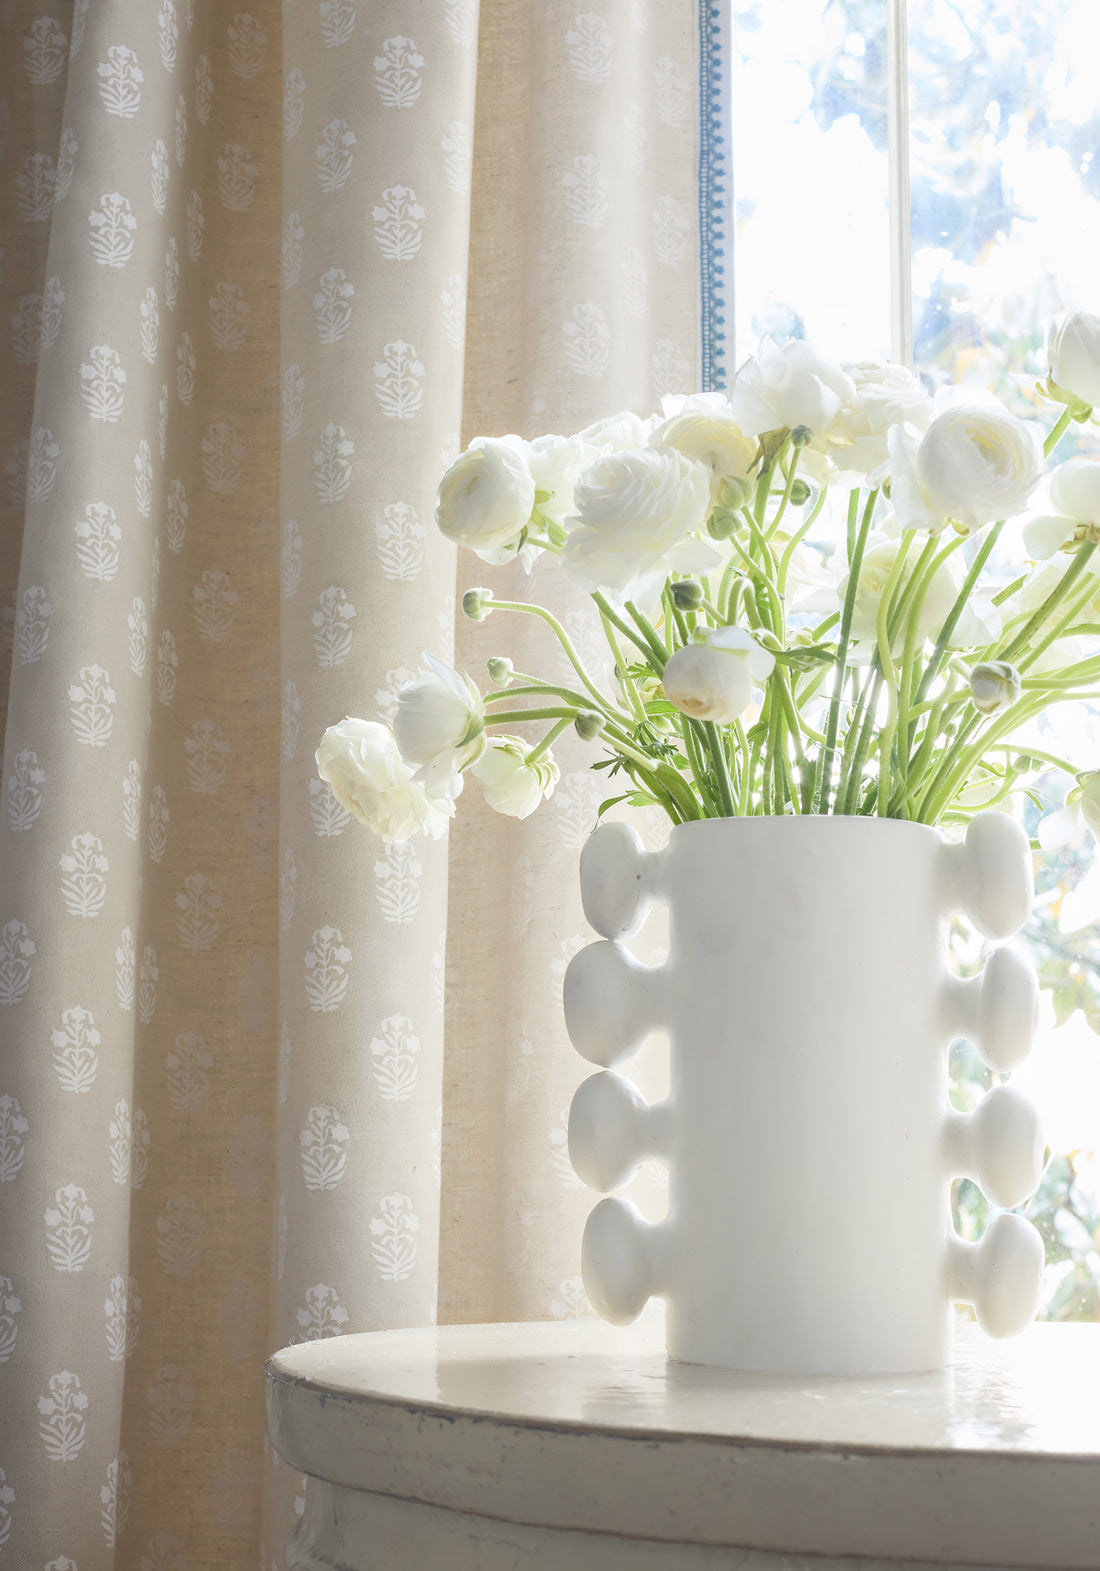 Curtains featuring Corwin fabric in white on natural color - pattern number F936405 - by Thibaut